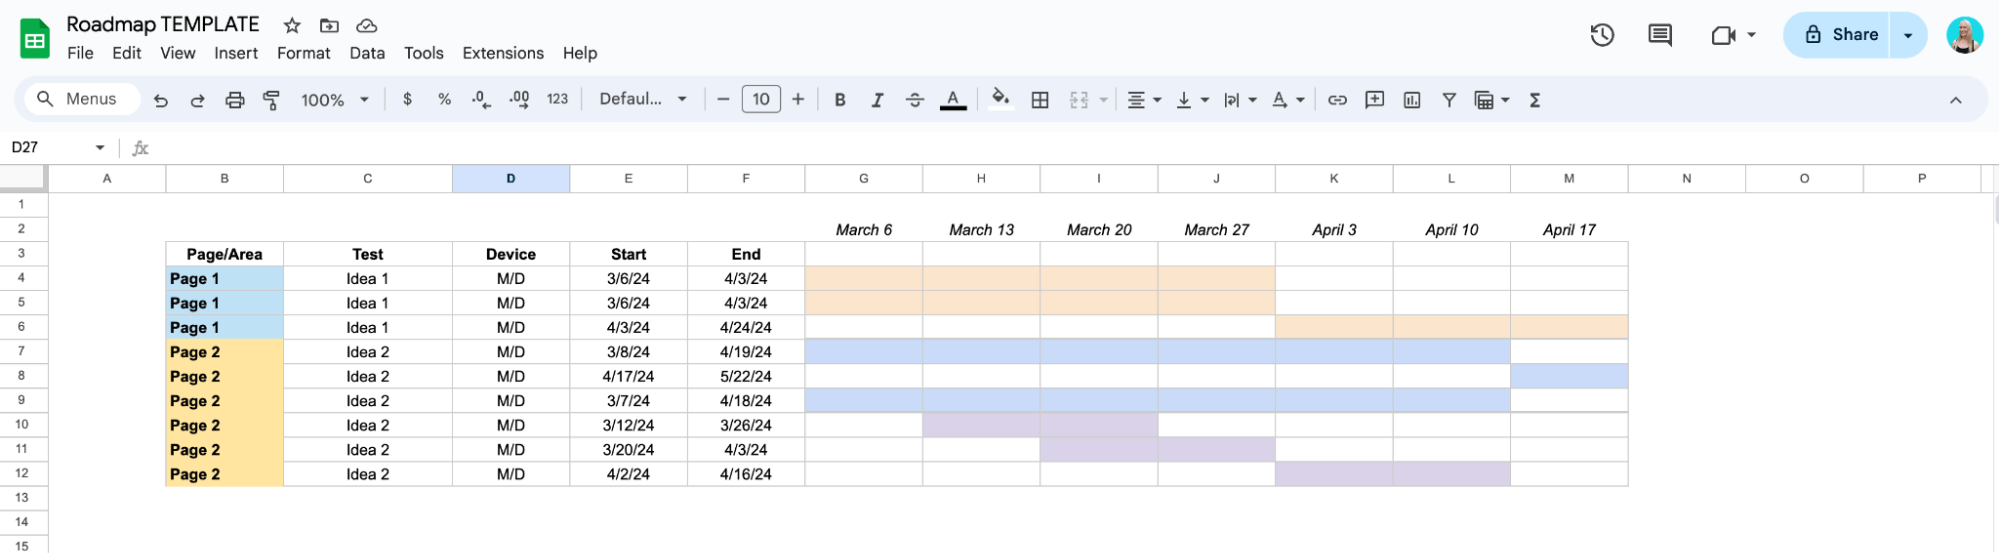 Table View of an A/B testing roadmap with the “Old” Gantt Chart view in Google Sheets